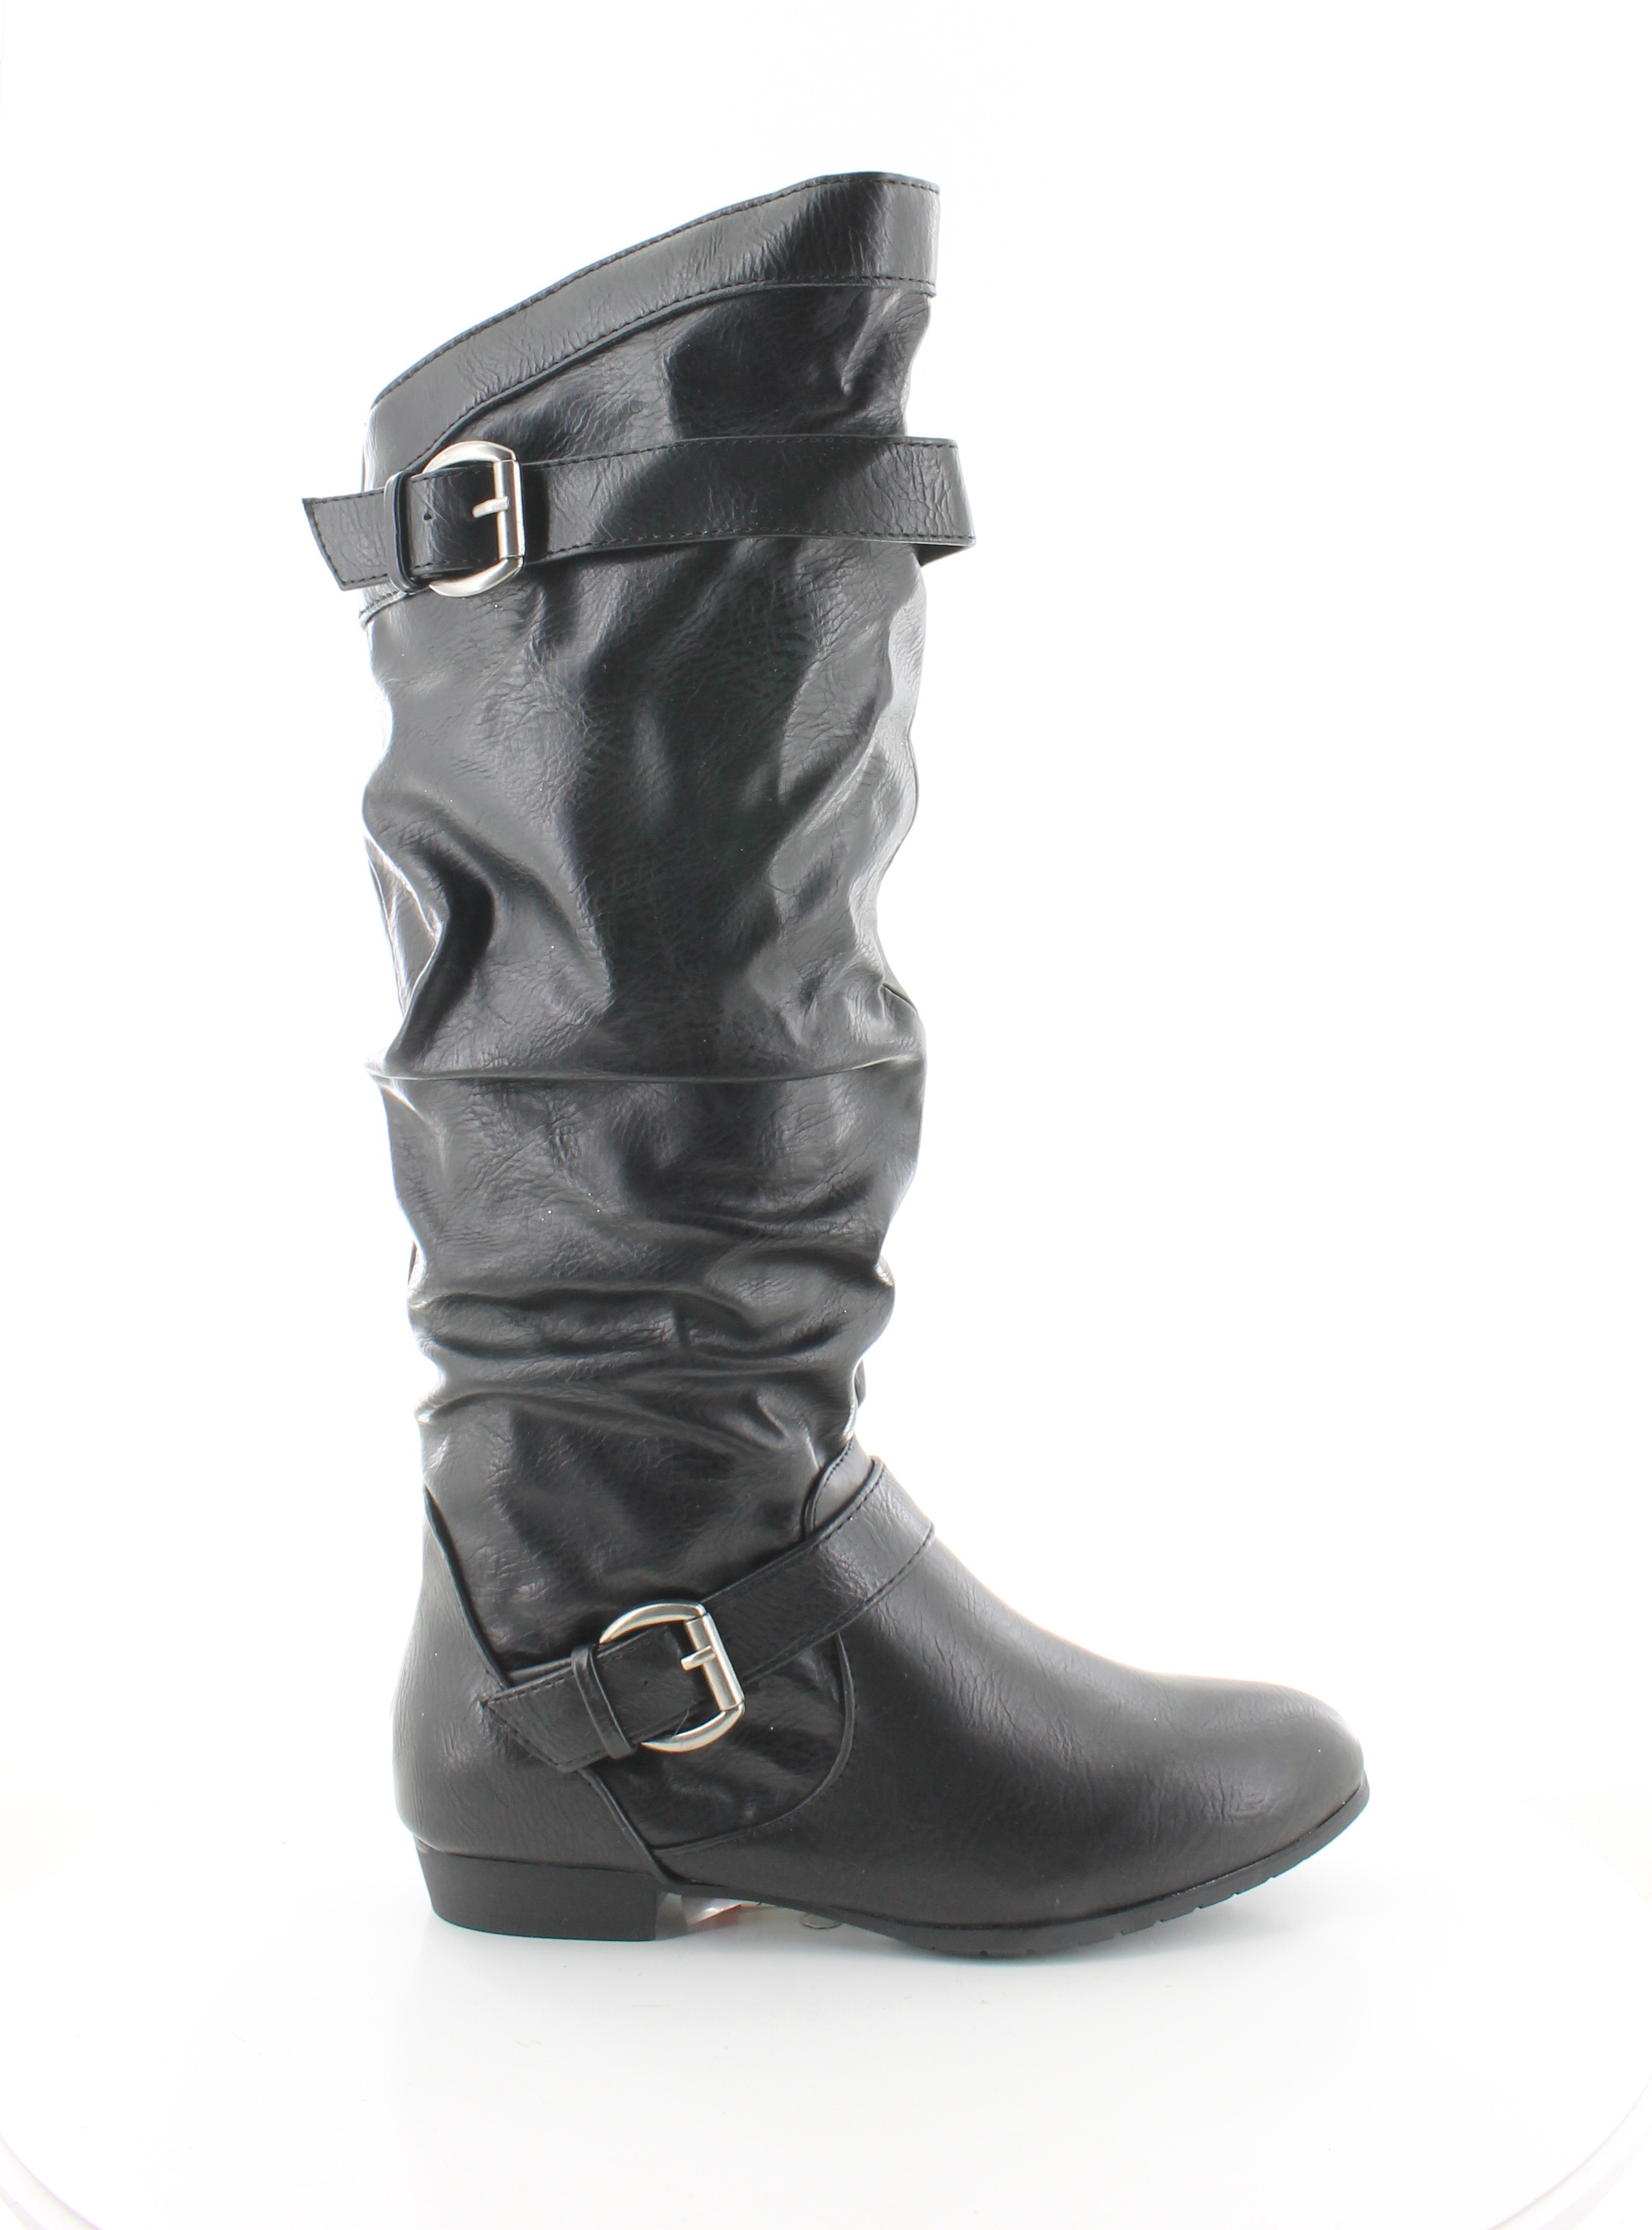 Rampage New Basking Black Womens Shoes Size 6 M Boots MSRP $60 | eBay